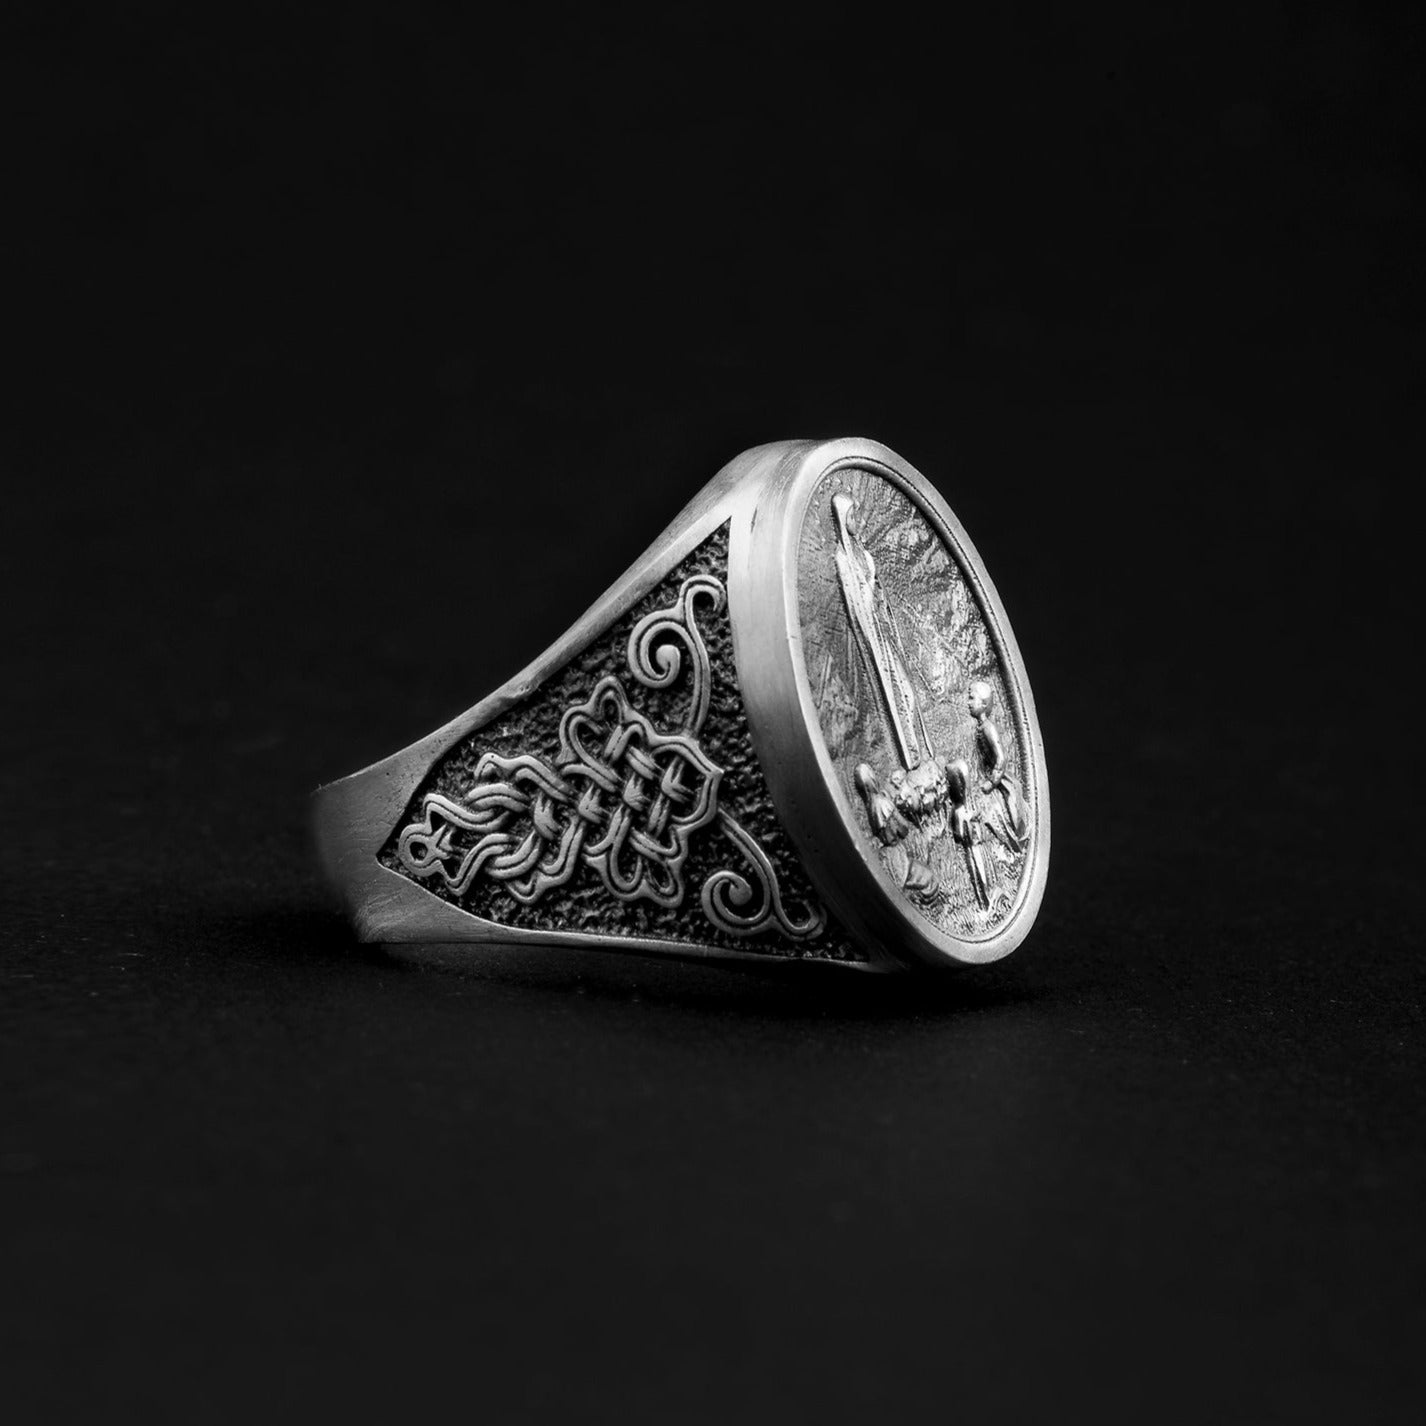 Catholic Religious Rings for Men at VisionGold.org®